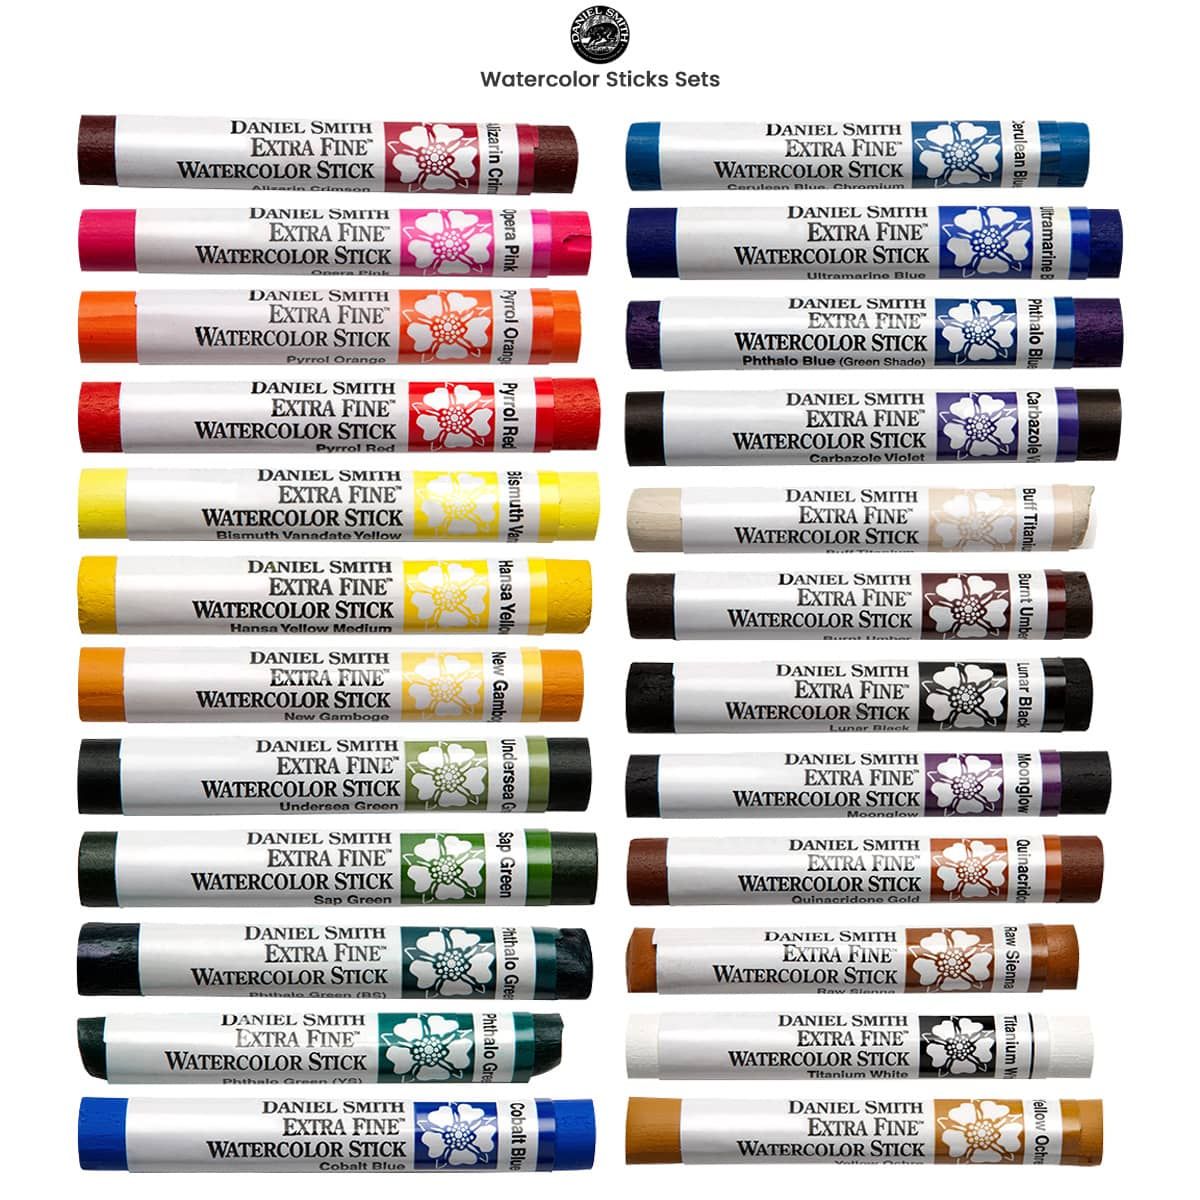 Daniel Smith Watercolor Ground - Sampler Set of 5 - 4oz Jars For Using  Watercolors On Any Surface Mars Black, Pearlescent White, Buff Titanium,  Transparent, Iridescent Gold 